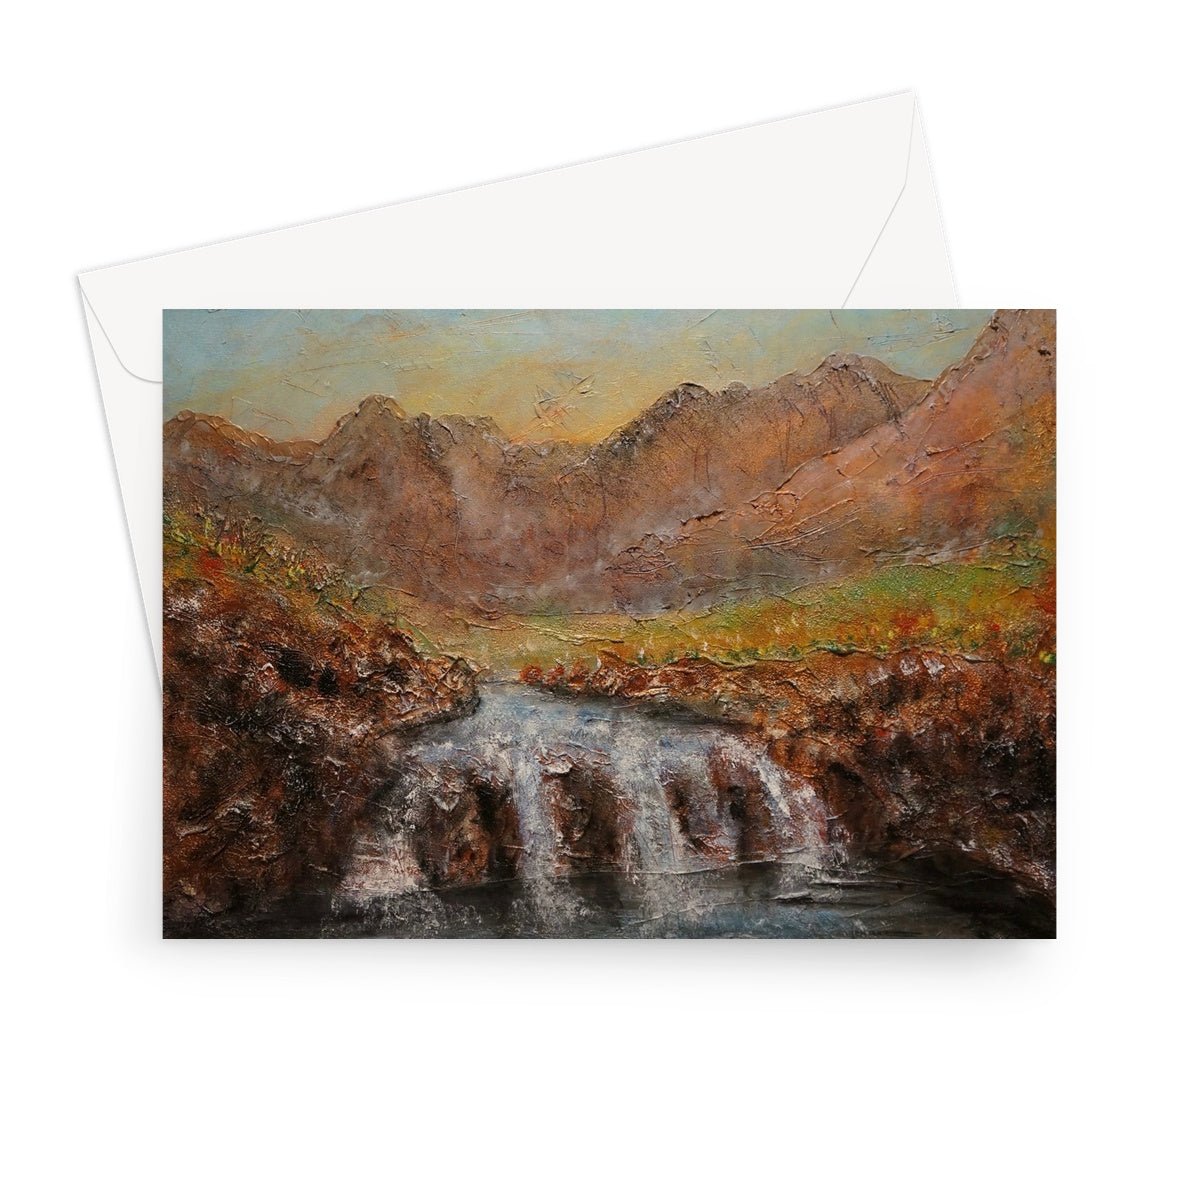 Fairy Pools Dawn Skye Art Gifts Greeting Card-Greetings Cards-Skye Art Gallery-7"x5"-1 Card-Paintings, Prints, Homeware, Art Gifts From Scotland By Scottish Artist Kevin Hunter